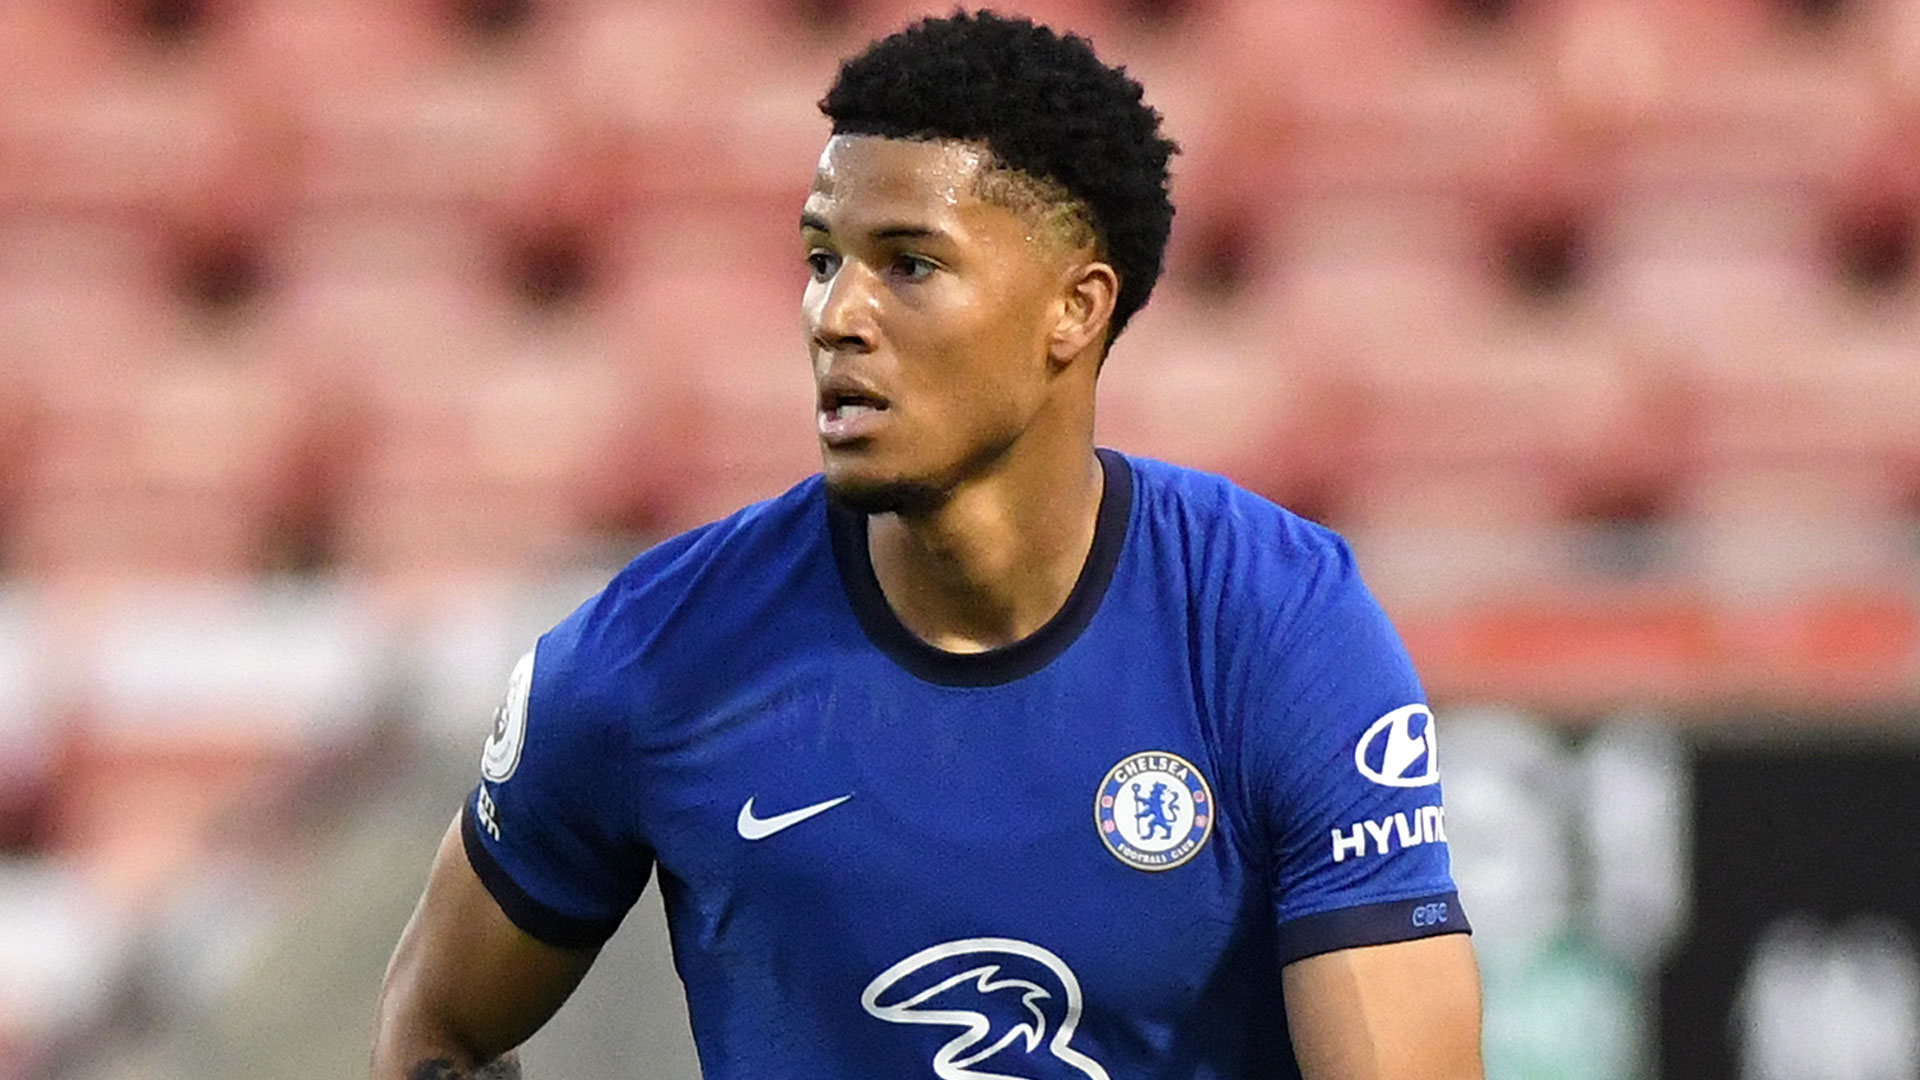 Ex-Chelsea wonderkid has defibrillator fitted after doctors warned he could have a heart attack at any time [Video]